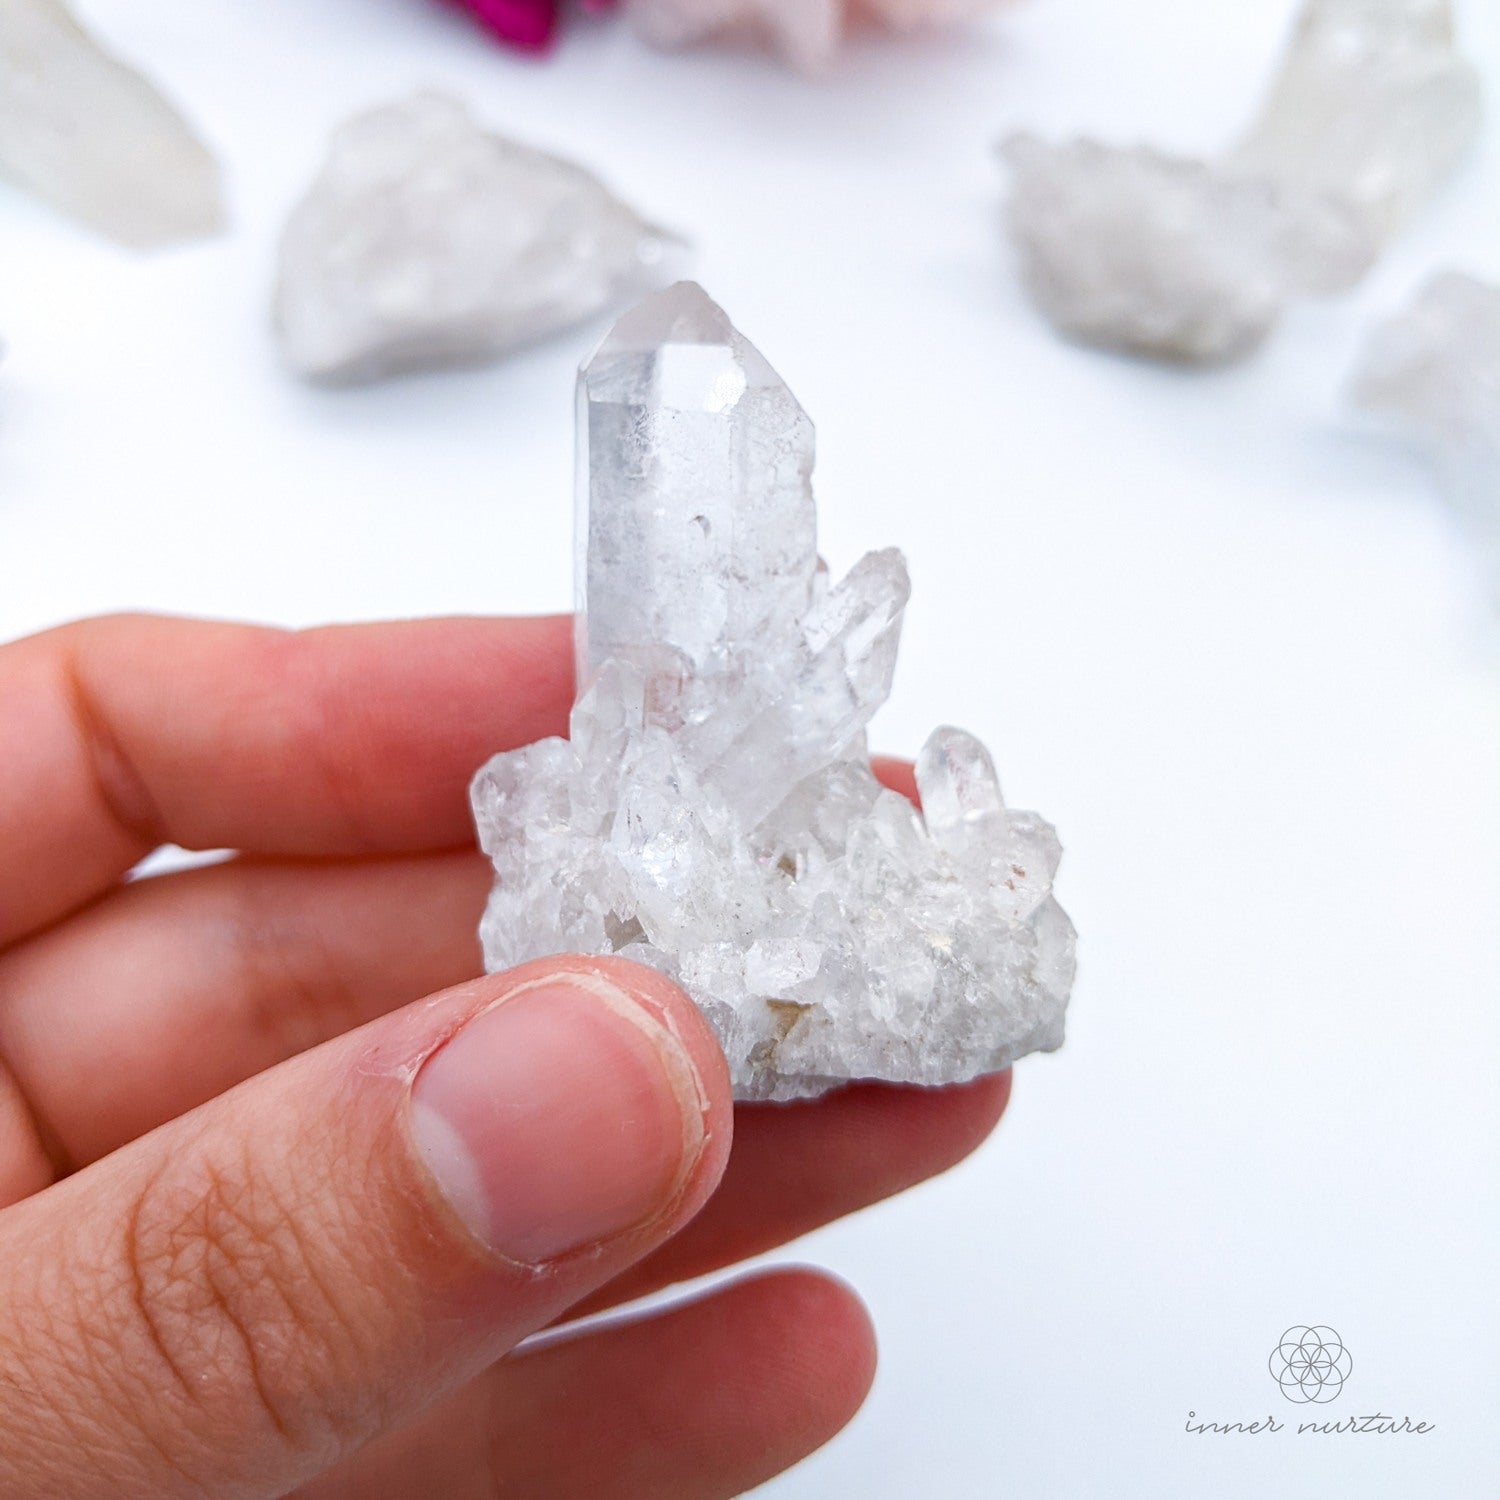 Clear Quartz Cluster - Small Sizes | Beautiful Healing Crystals Australia - Shop Online | Ethically Sourced